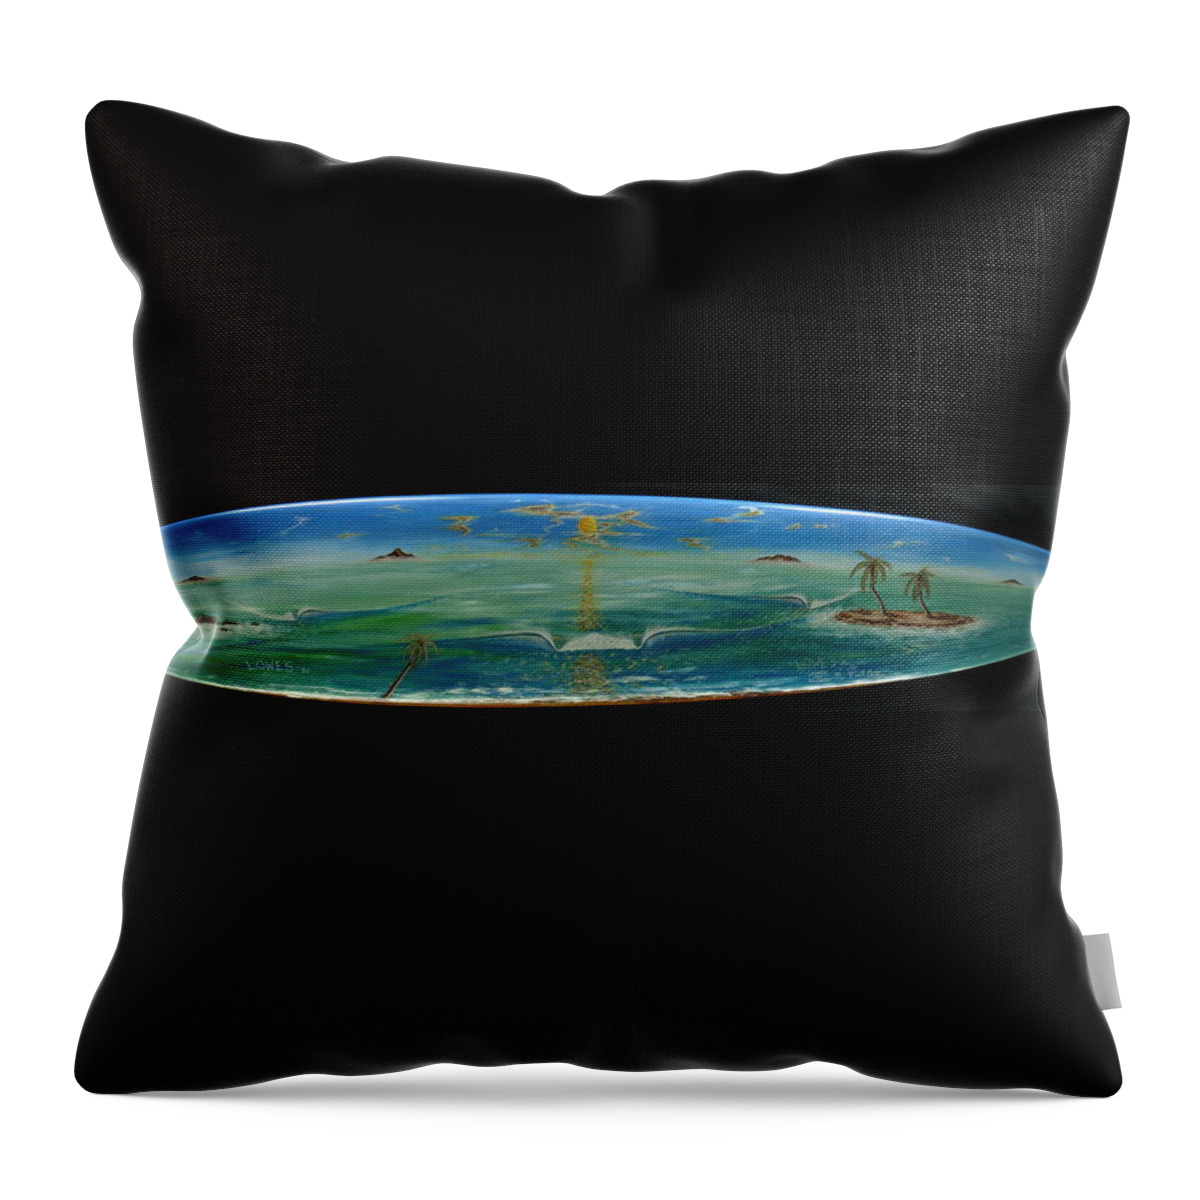 Islandsurfdreams Throw Pillow featuring the painting Island Surf Dreams by Paul Carter